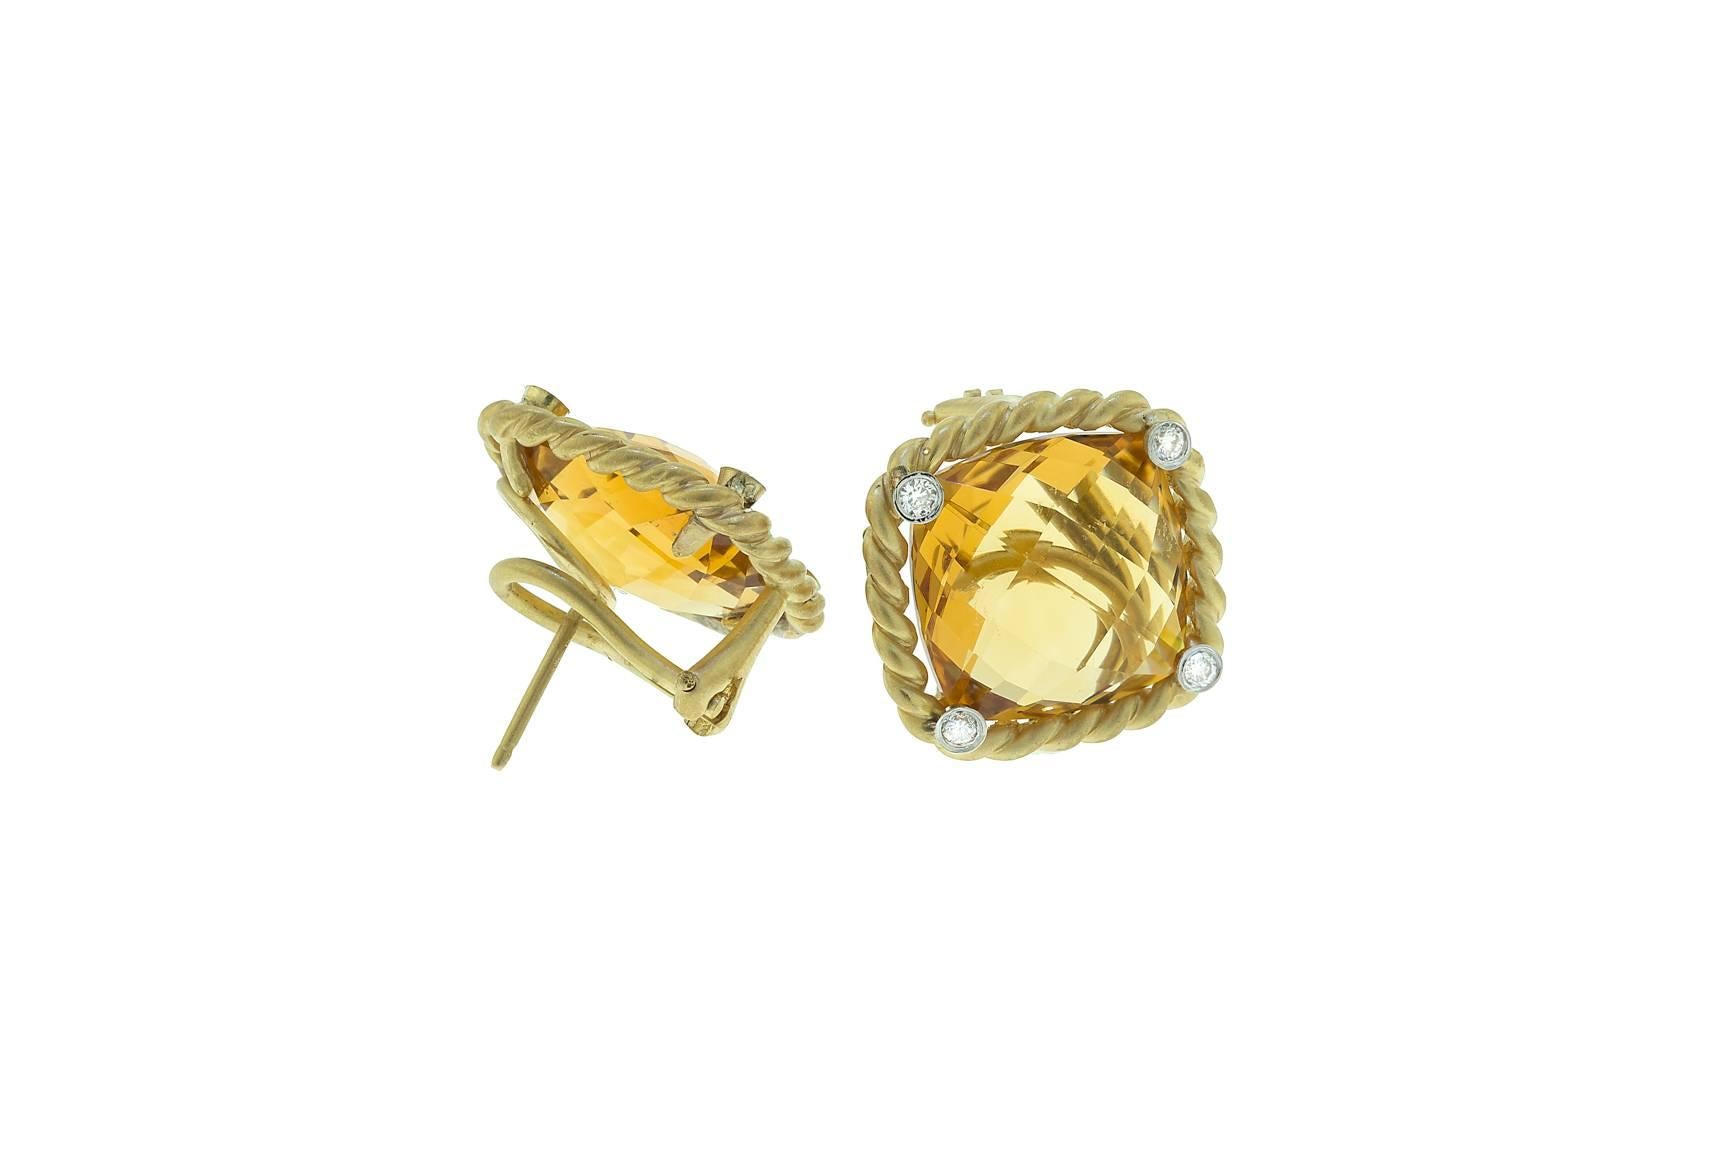 14K yellow gold earrings with checkerboard cut citrine and eight diamonds weighing combined 0.24 carat.